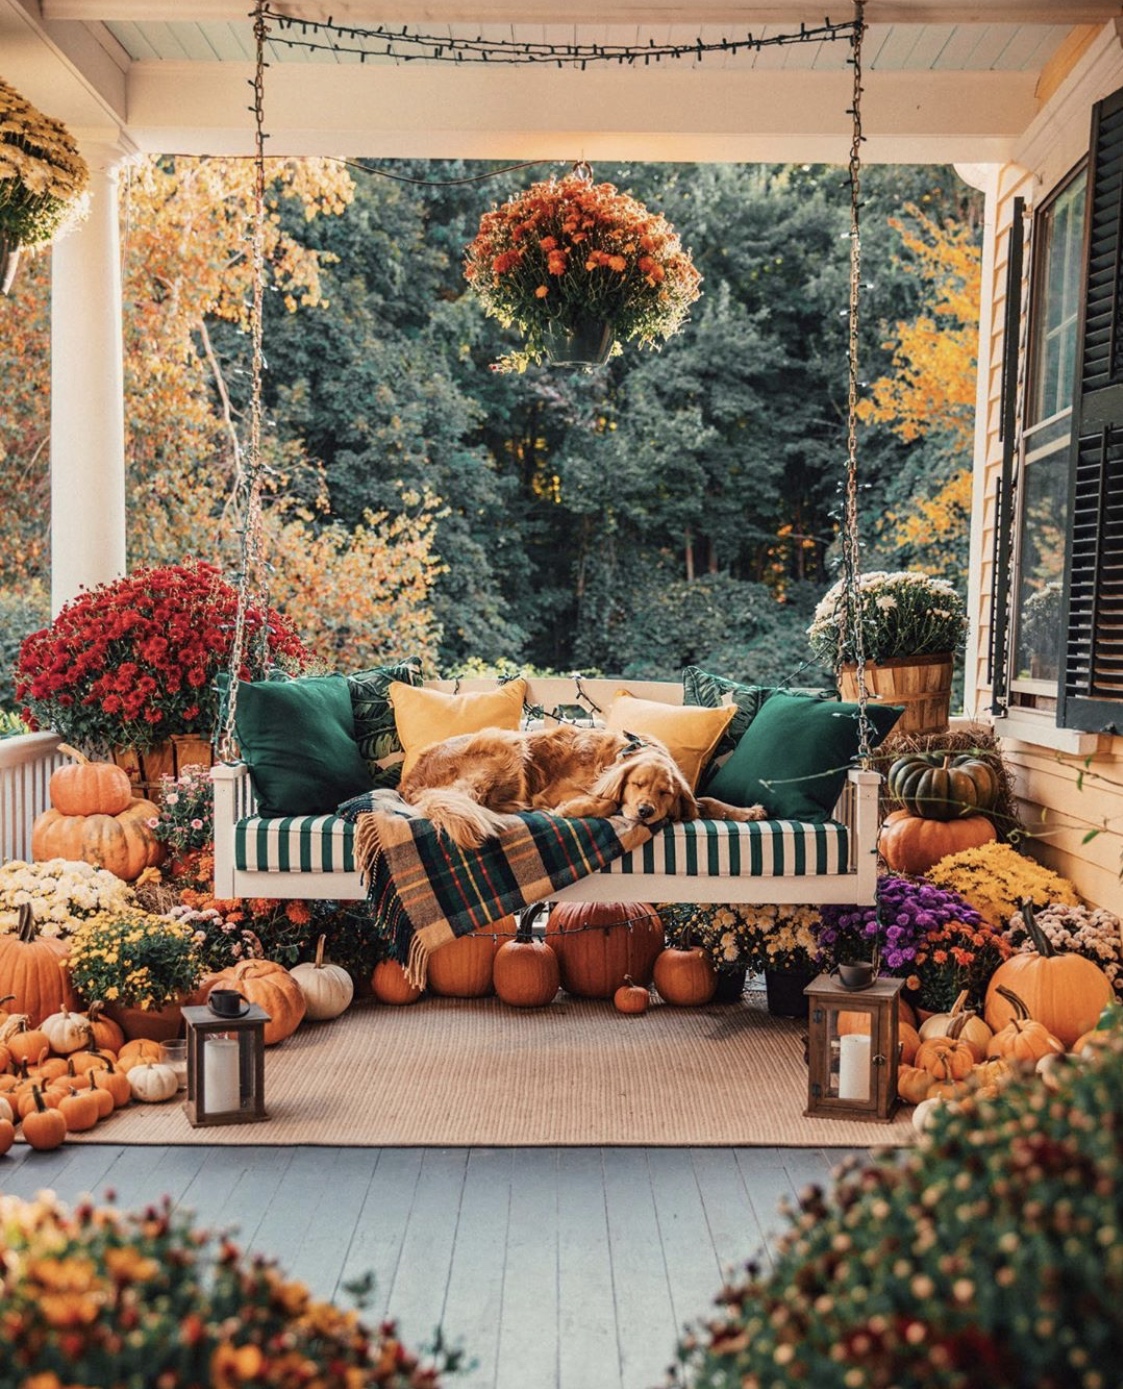 3 Tips For Getting Your Home Fall Ready